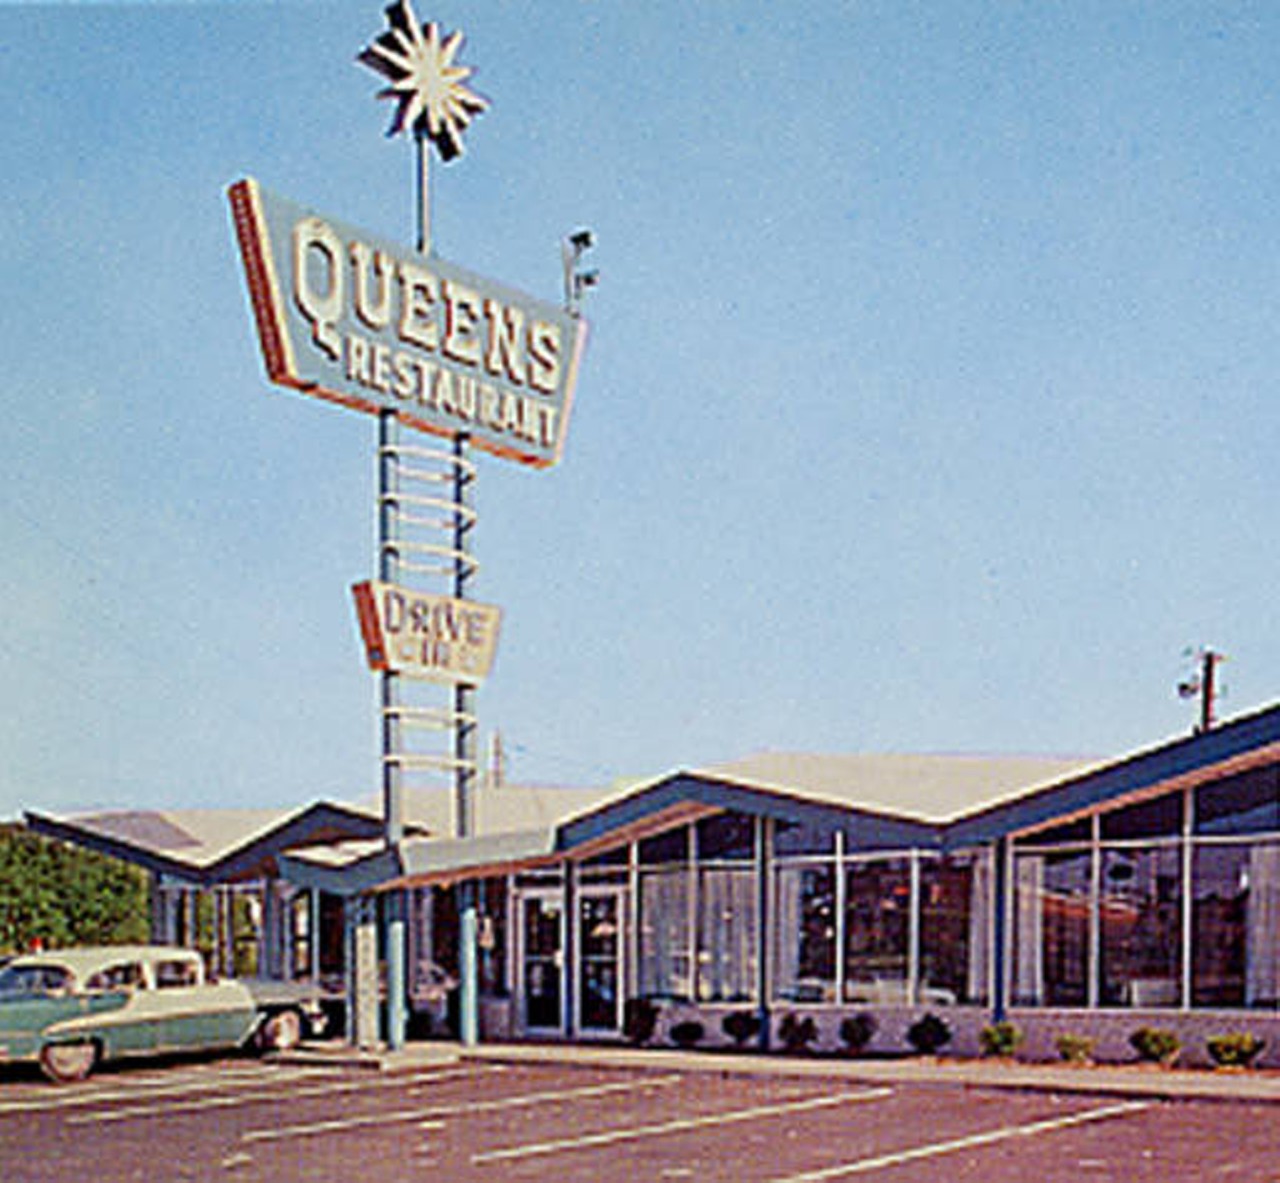 Queens Restaurant and Drive-In. 7503 Granger Rd.